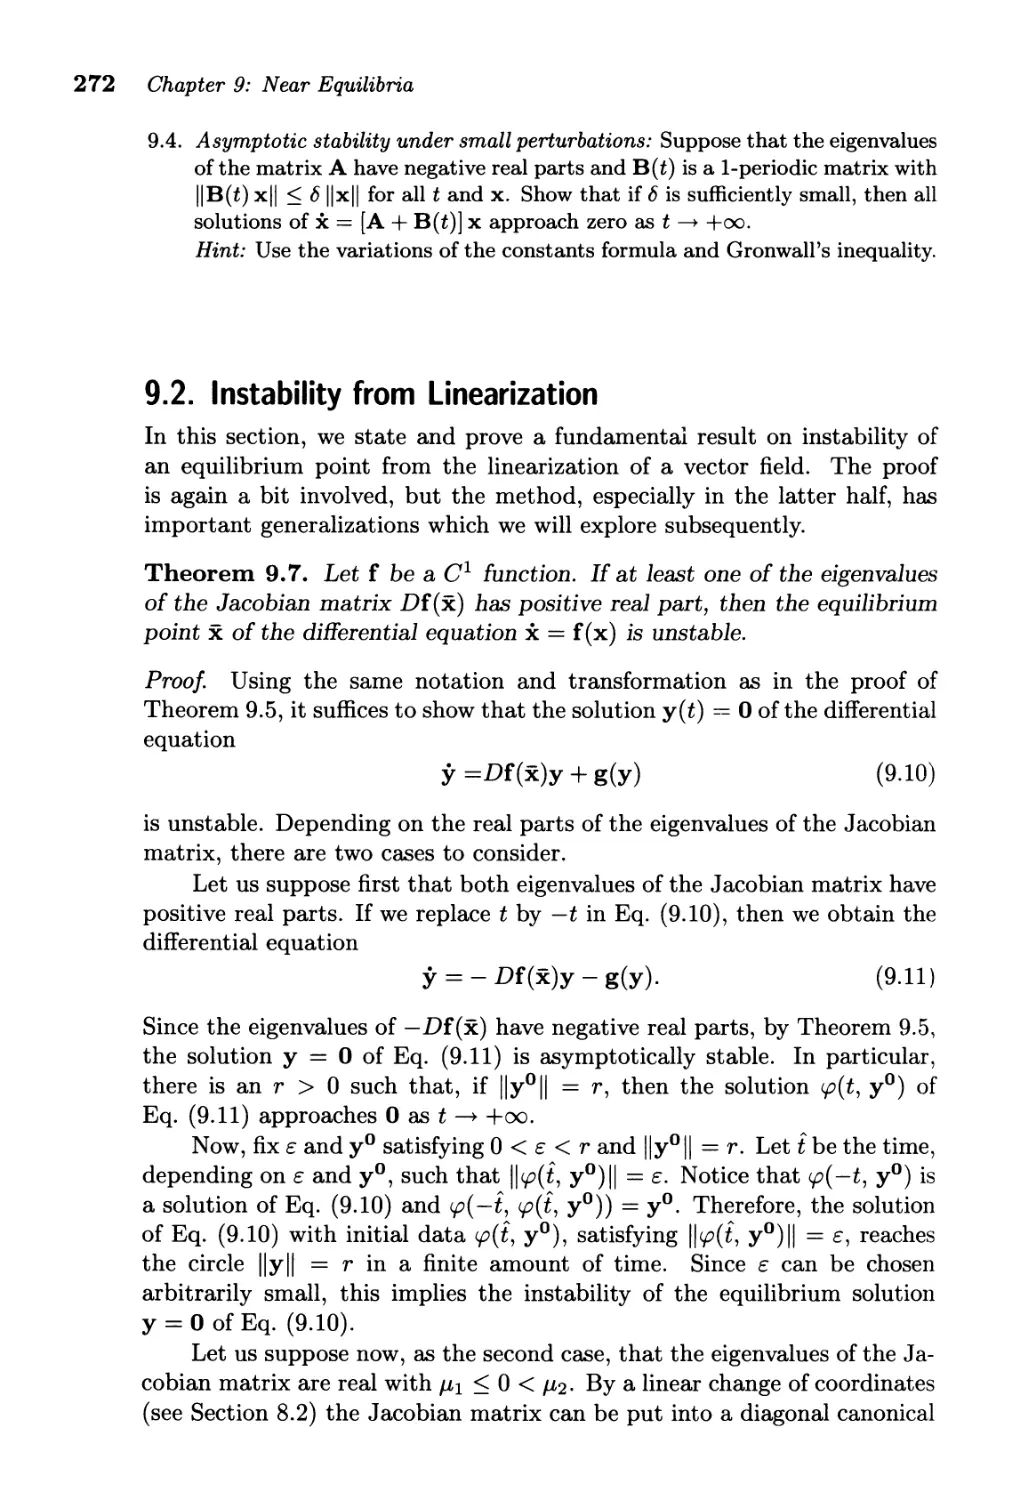 9.2. Instability from Linearization